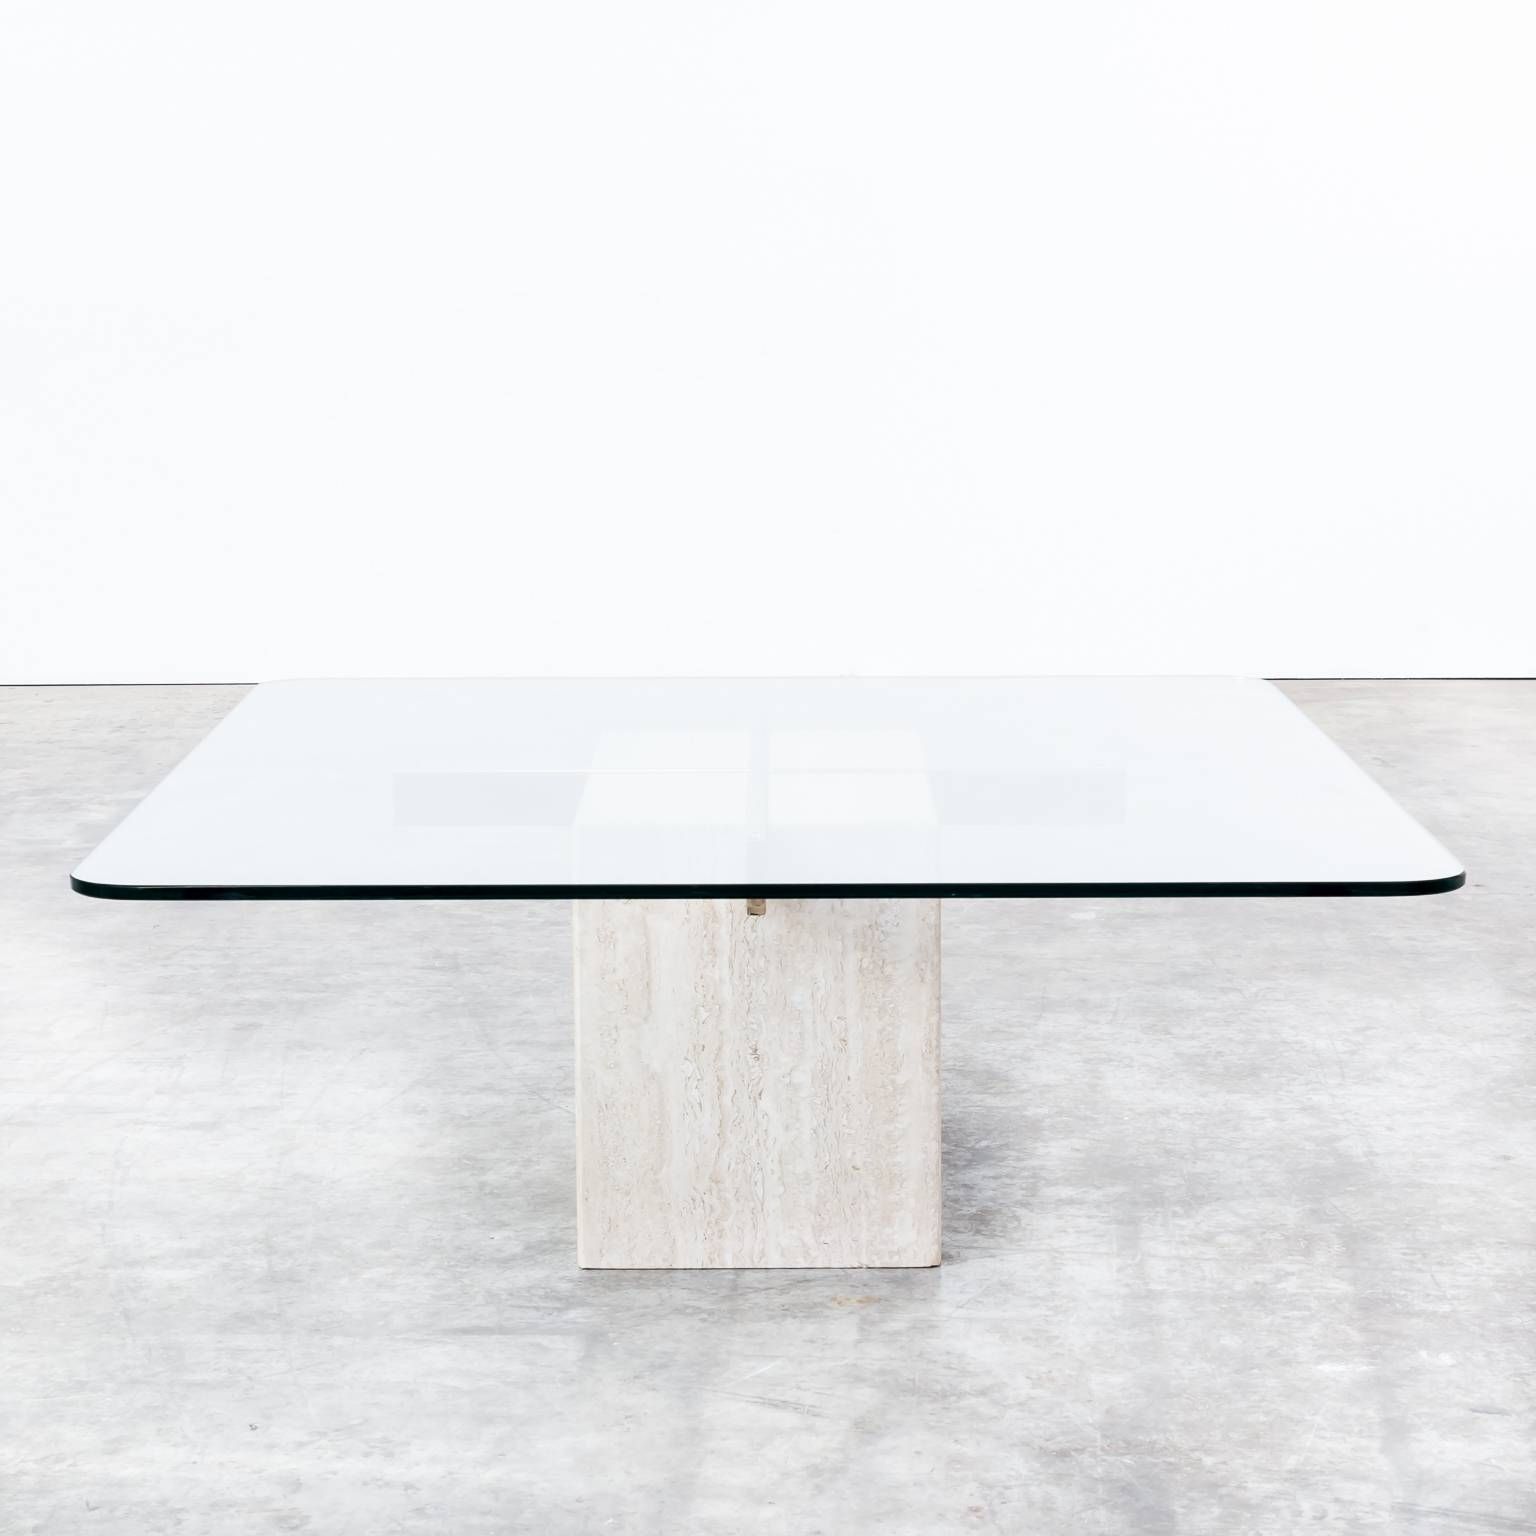 70s Artedi Italian Travertine Base, Glass Top Coffee Table | Barbmama With Retro Glass Top Coffee Tables (View 29 of 30)